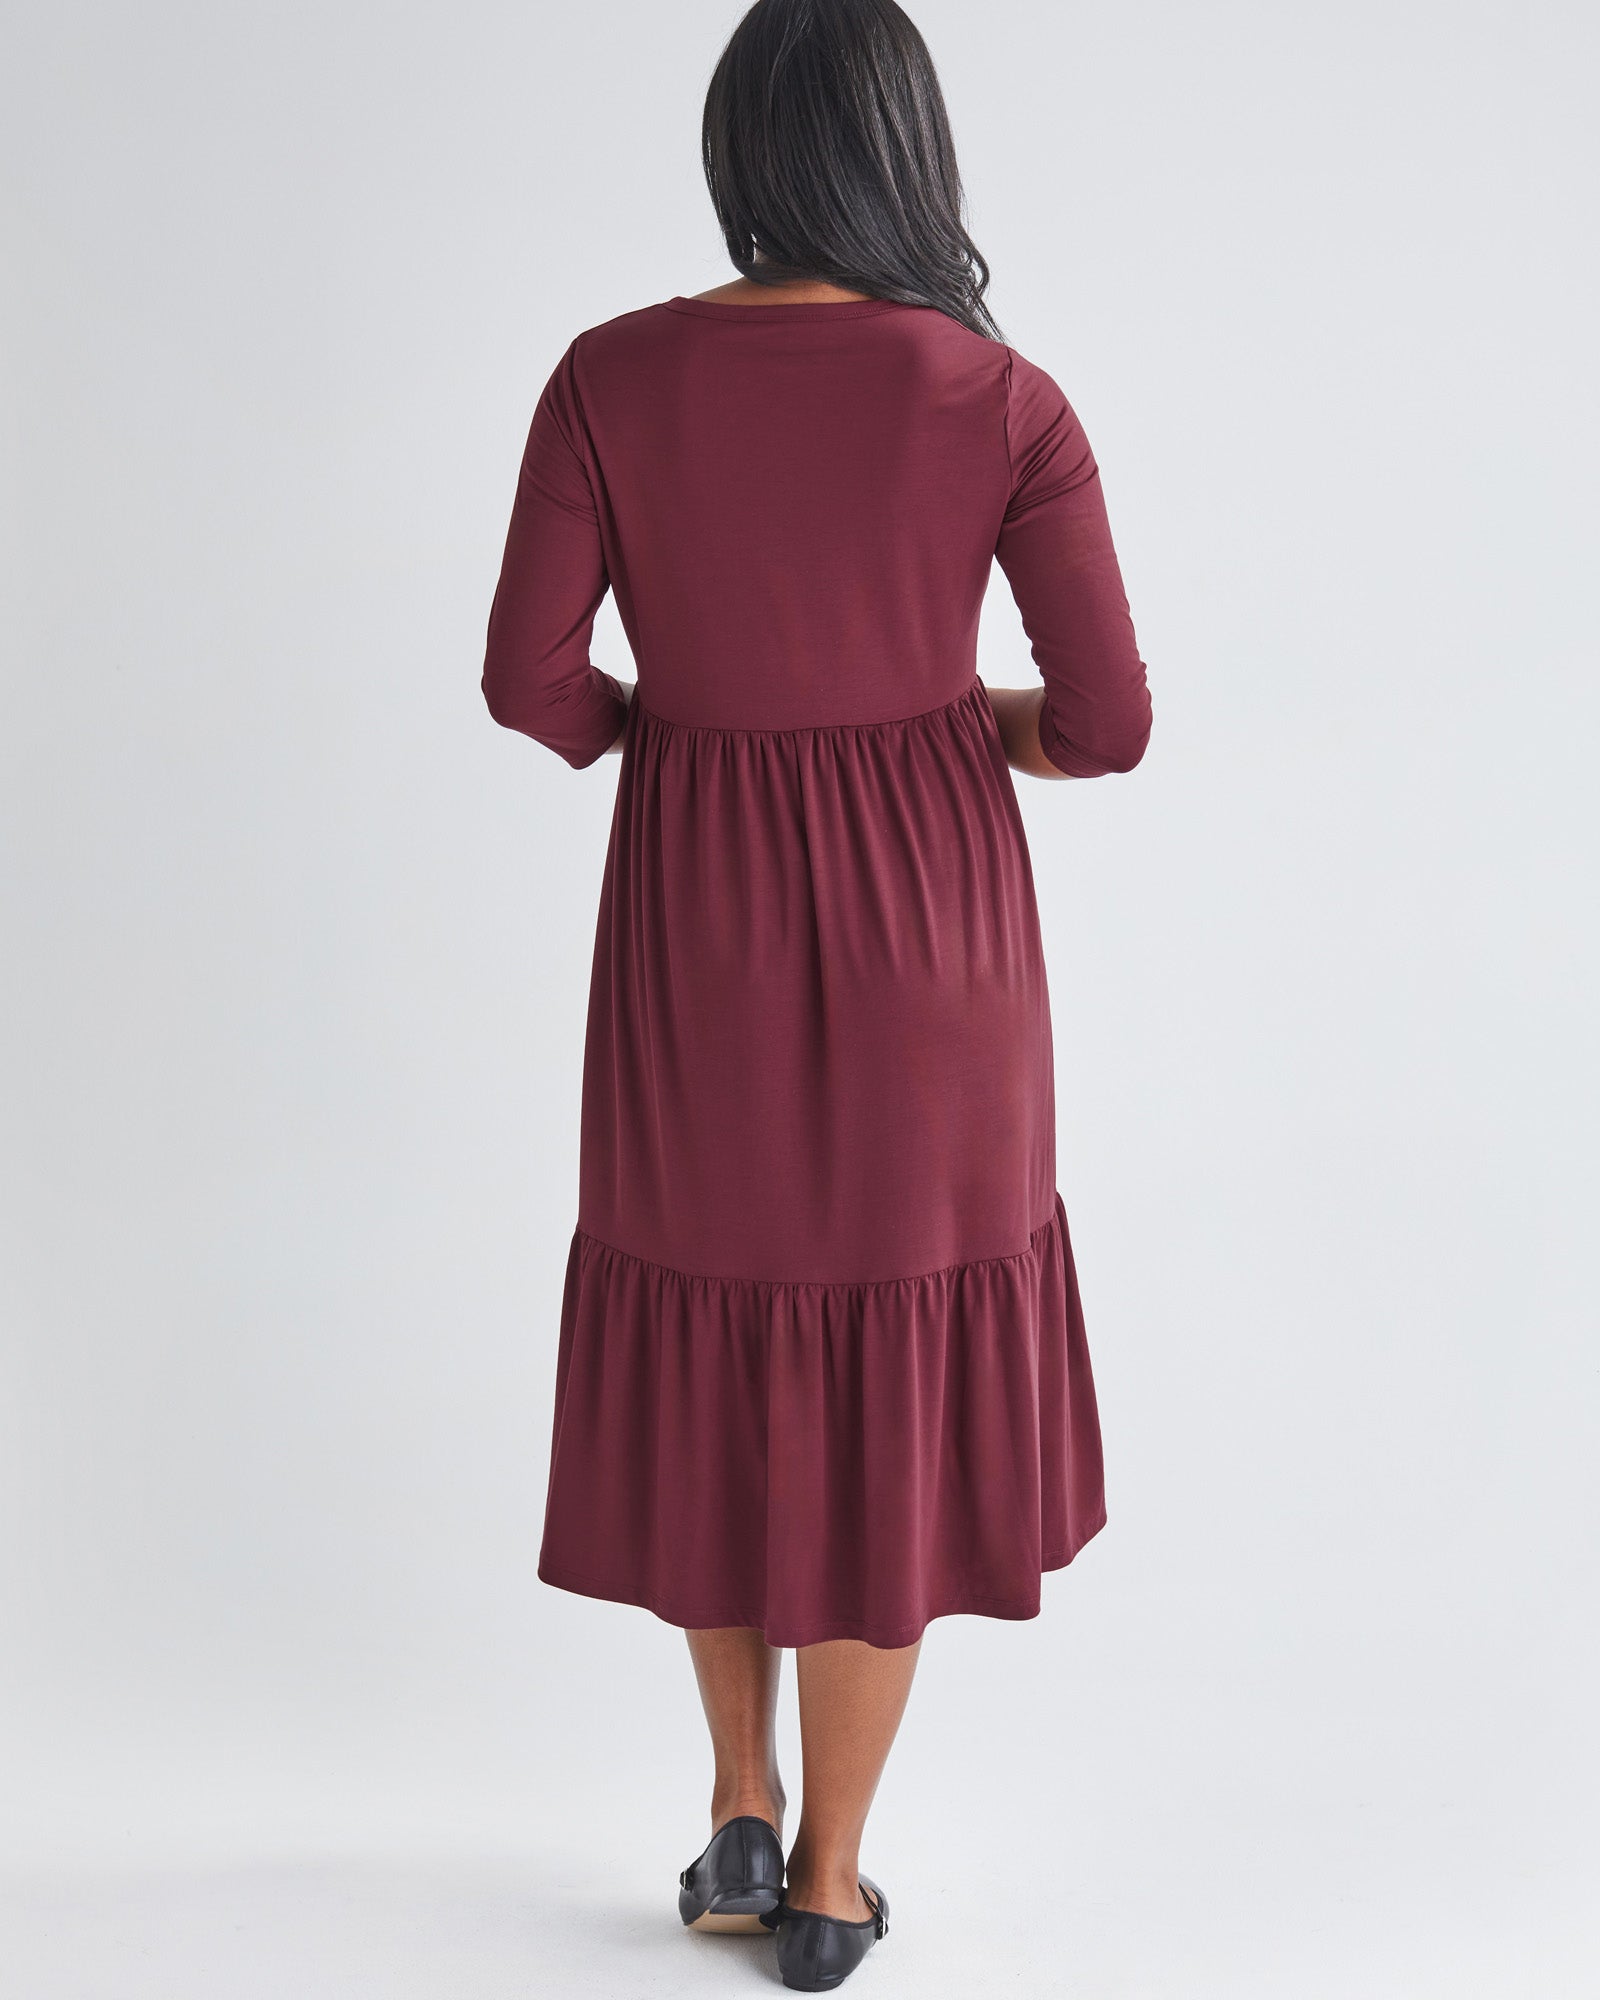 Back View - A Pregnannt Woman Wearing Tiered Maternity Midi Dress in Burgundy from Angel Maternity.